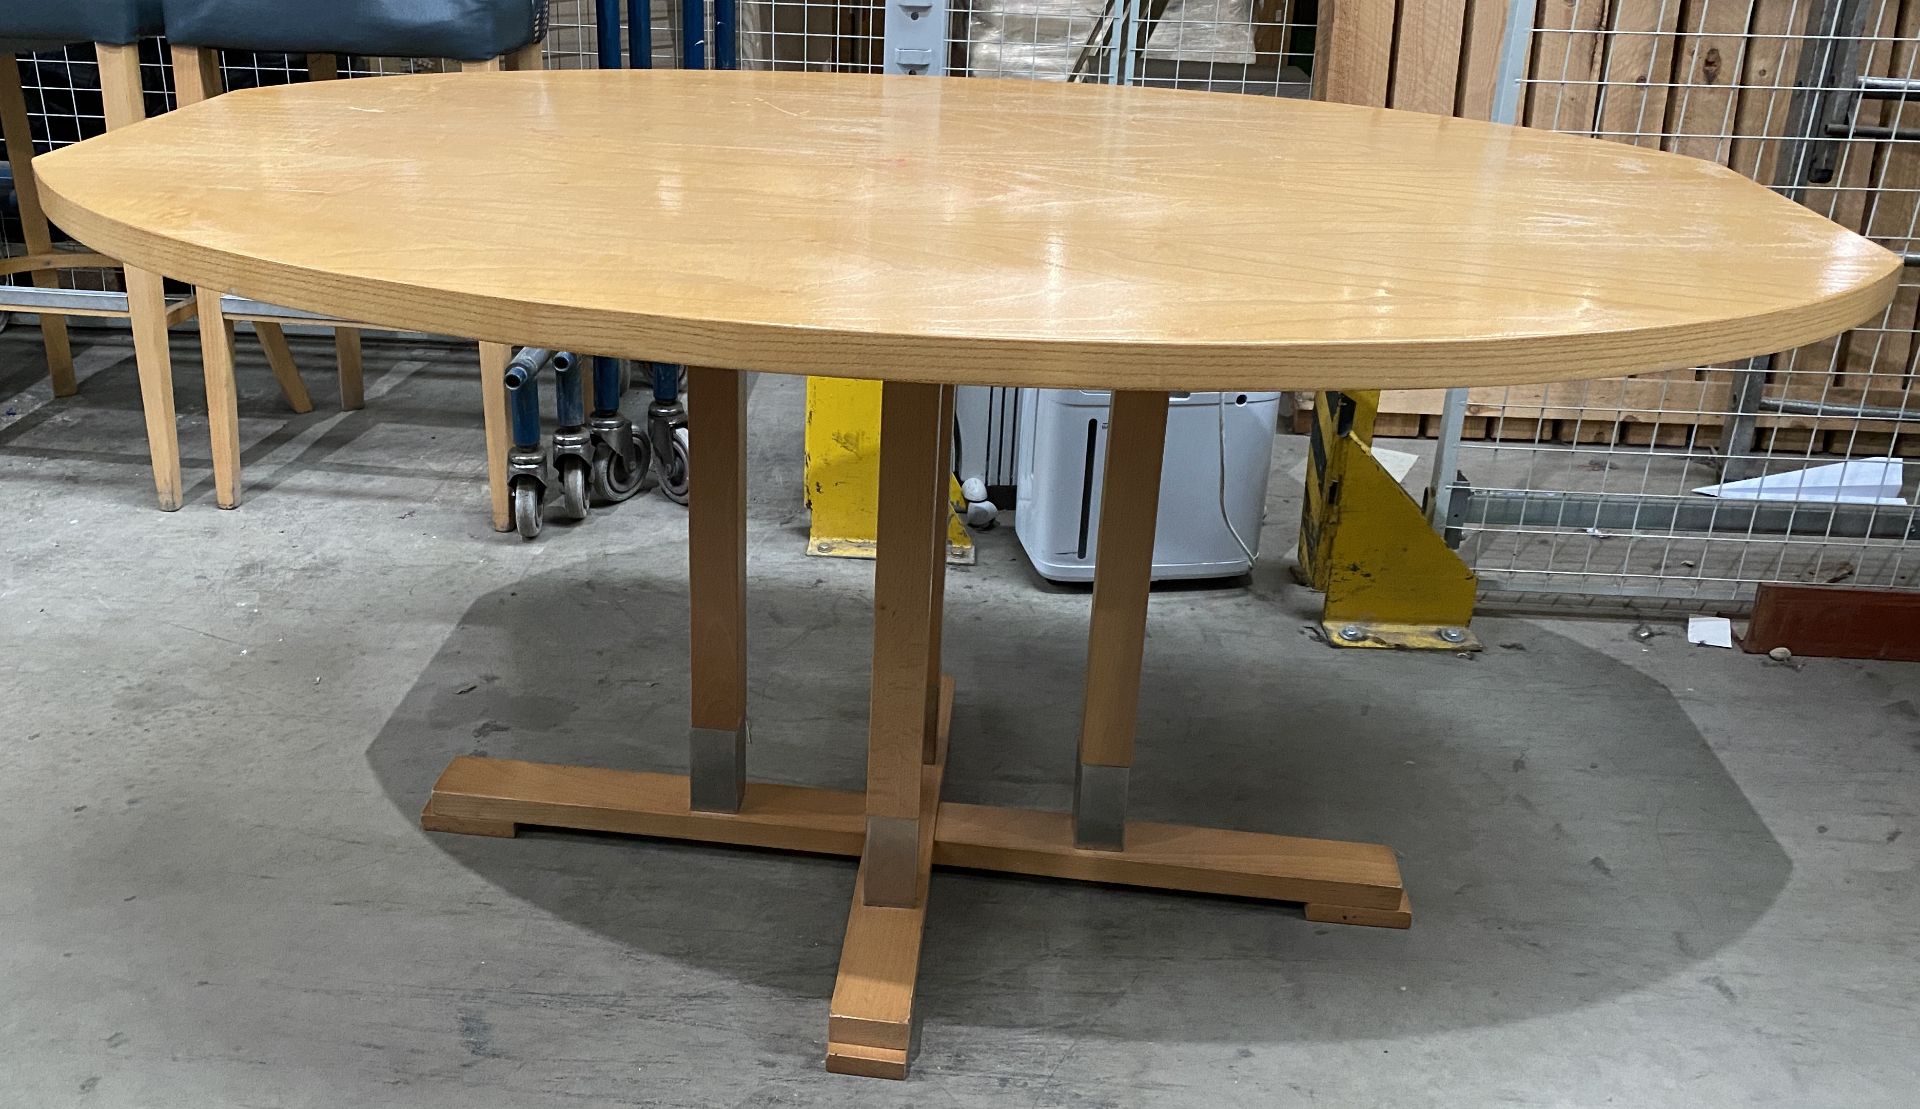 3 x Oval Oak Laminate Square Ended Dining Tables on 4 Leg Base - 100cm x 145cm - Image 2 of 2